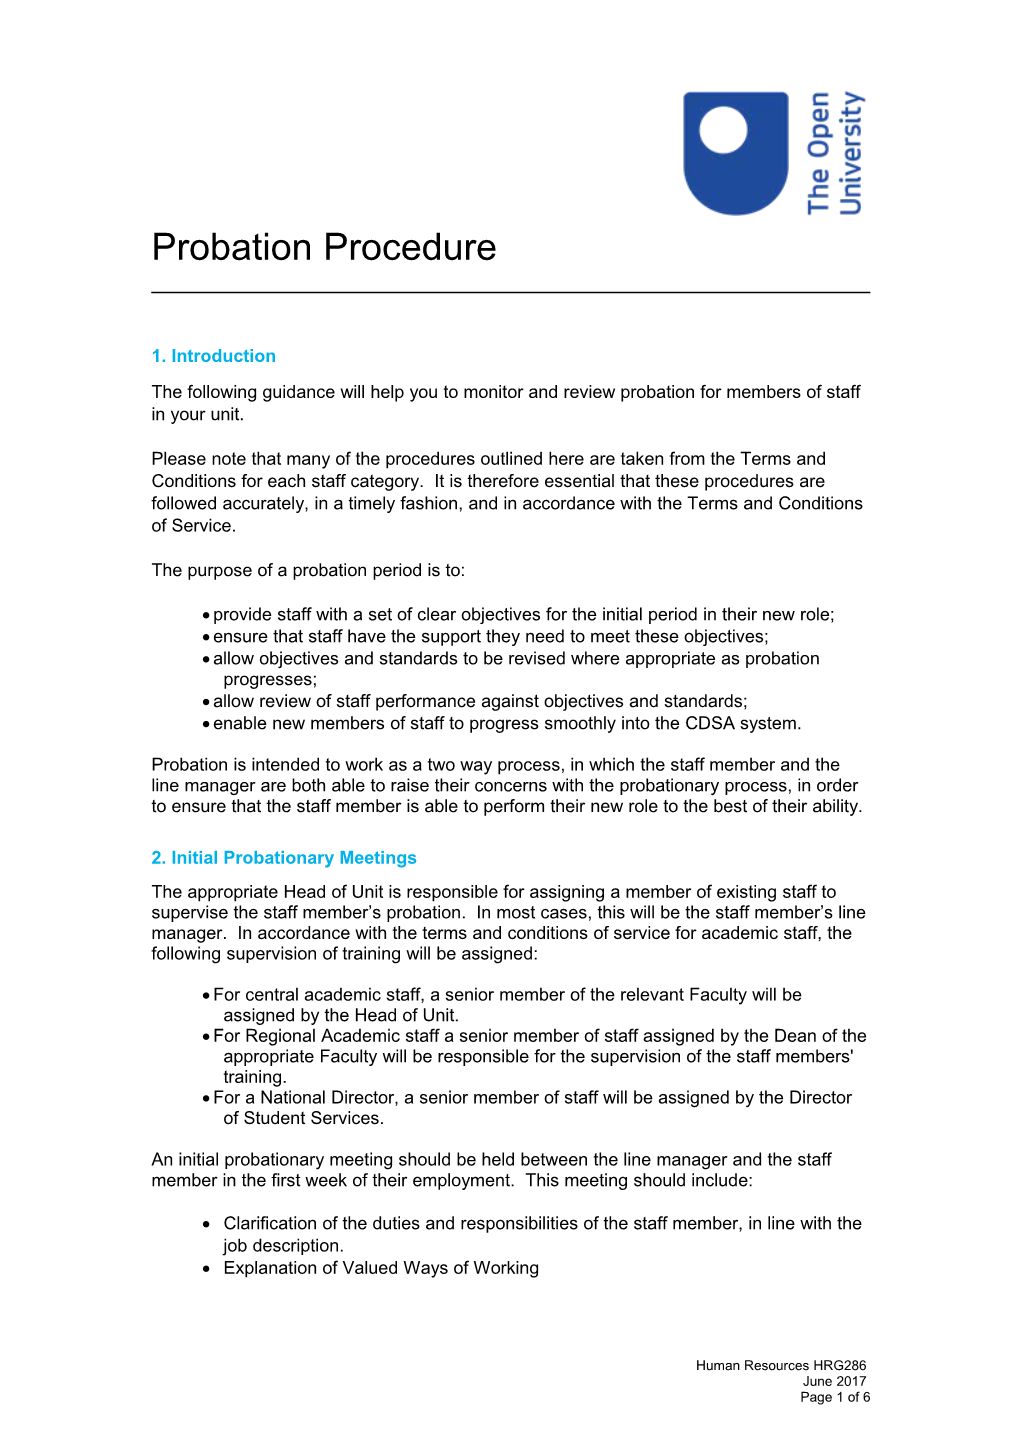 The Purpose of a Probation Period Is To